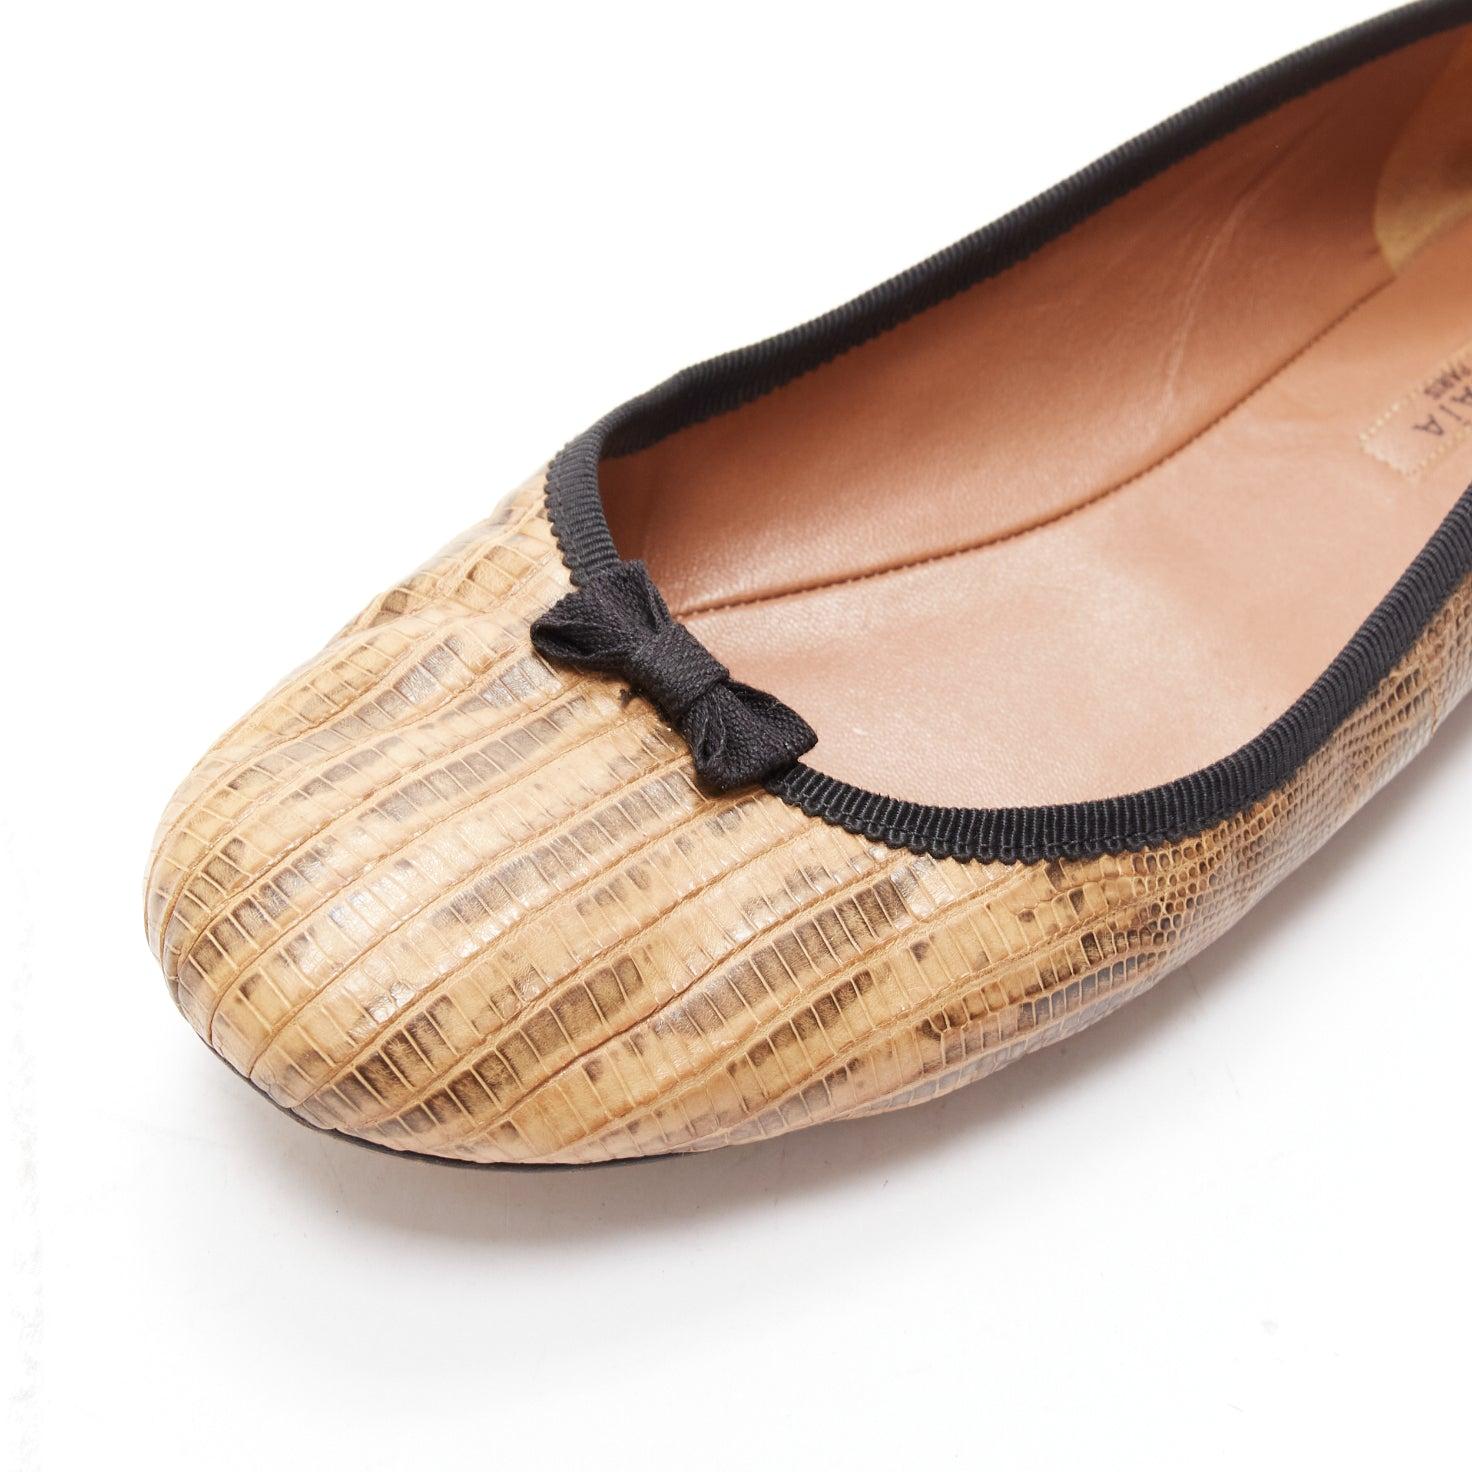 ALAIA brown scaled leather black bow trim ballerina flats shoes EU37 For Sale 2